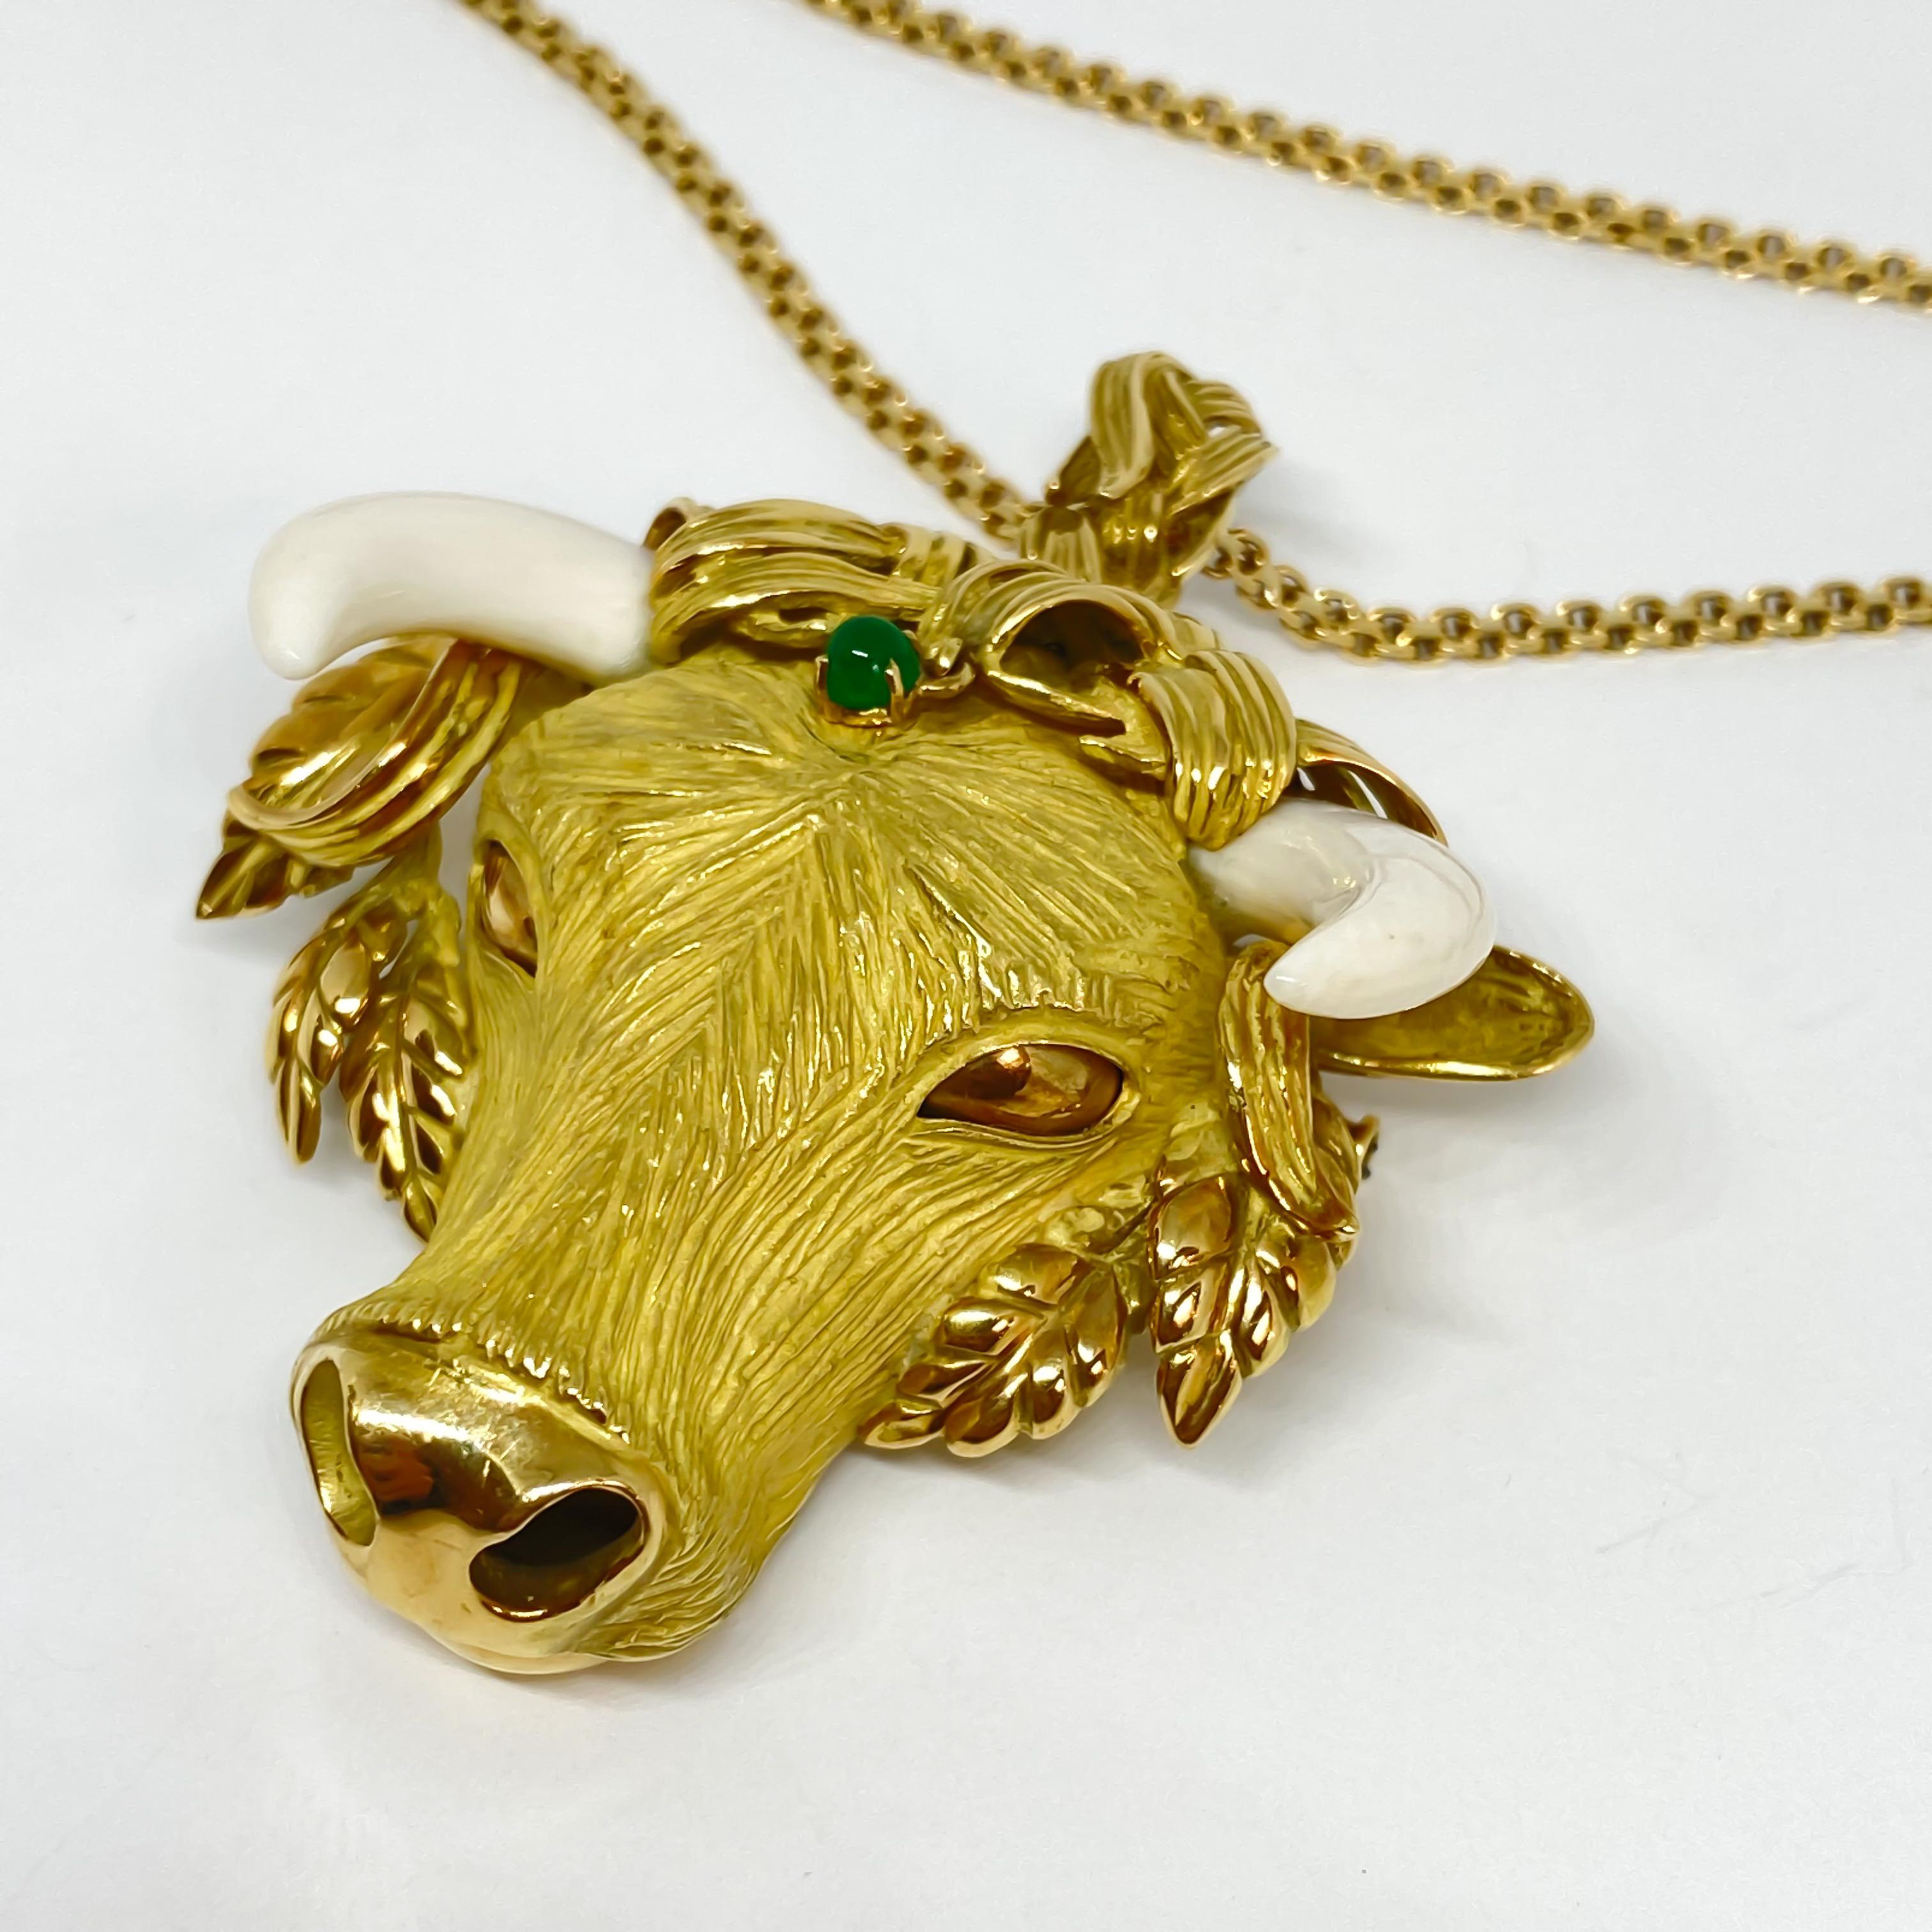 Very exquisite Bull pendant that converts into a brooch is designed in 18 karat yellow gold. The estate piece has natural ivory horns and emerald dangle from headdress. It is enhanced by beautiful polished leaves, polished nose and eyes. The head is